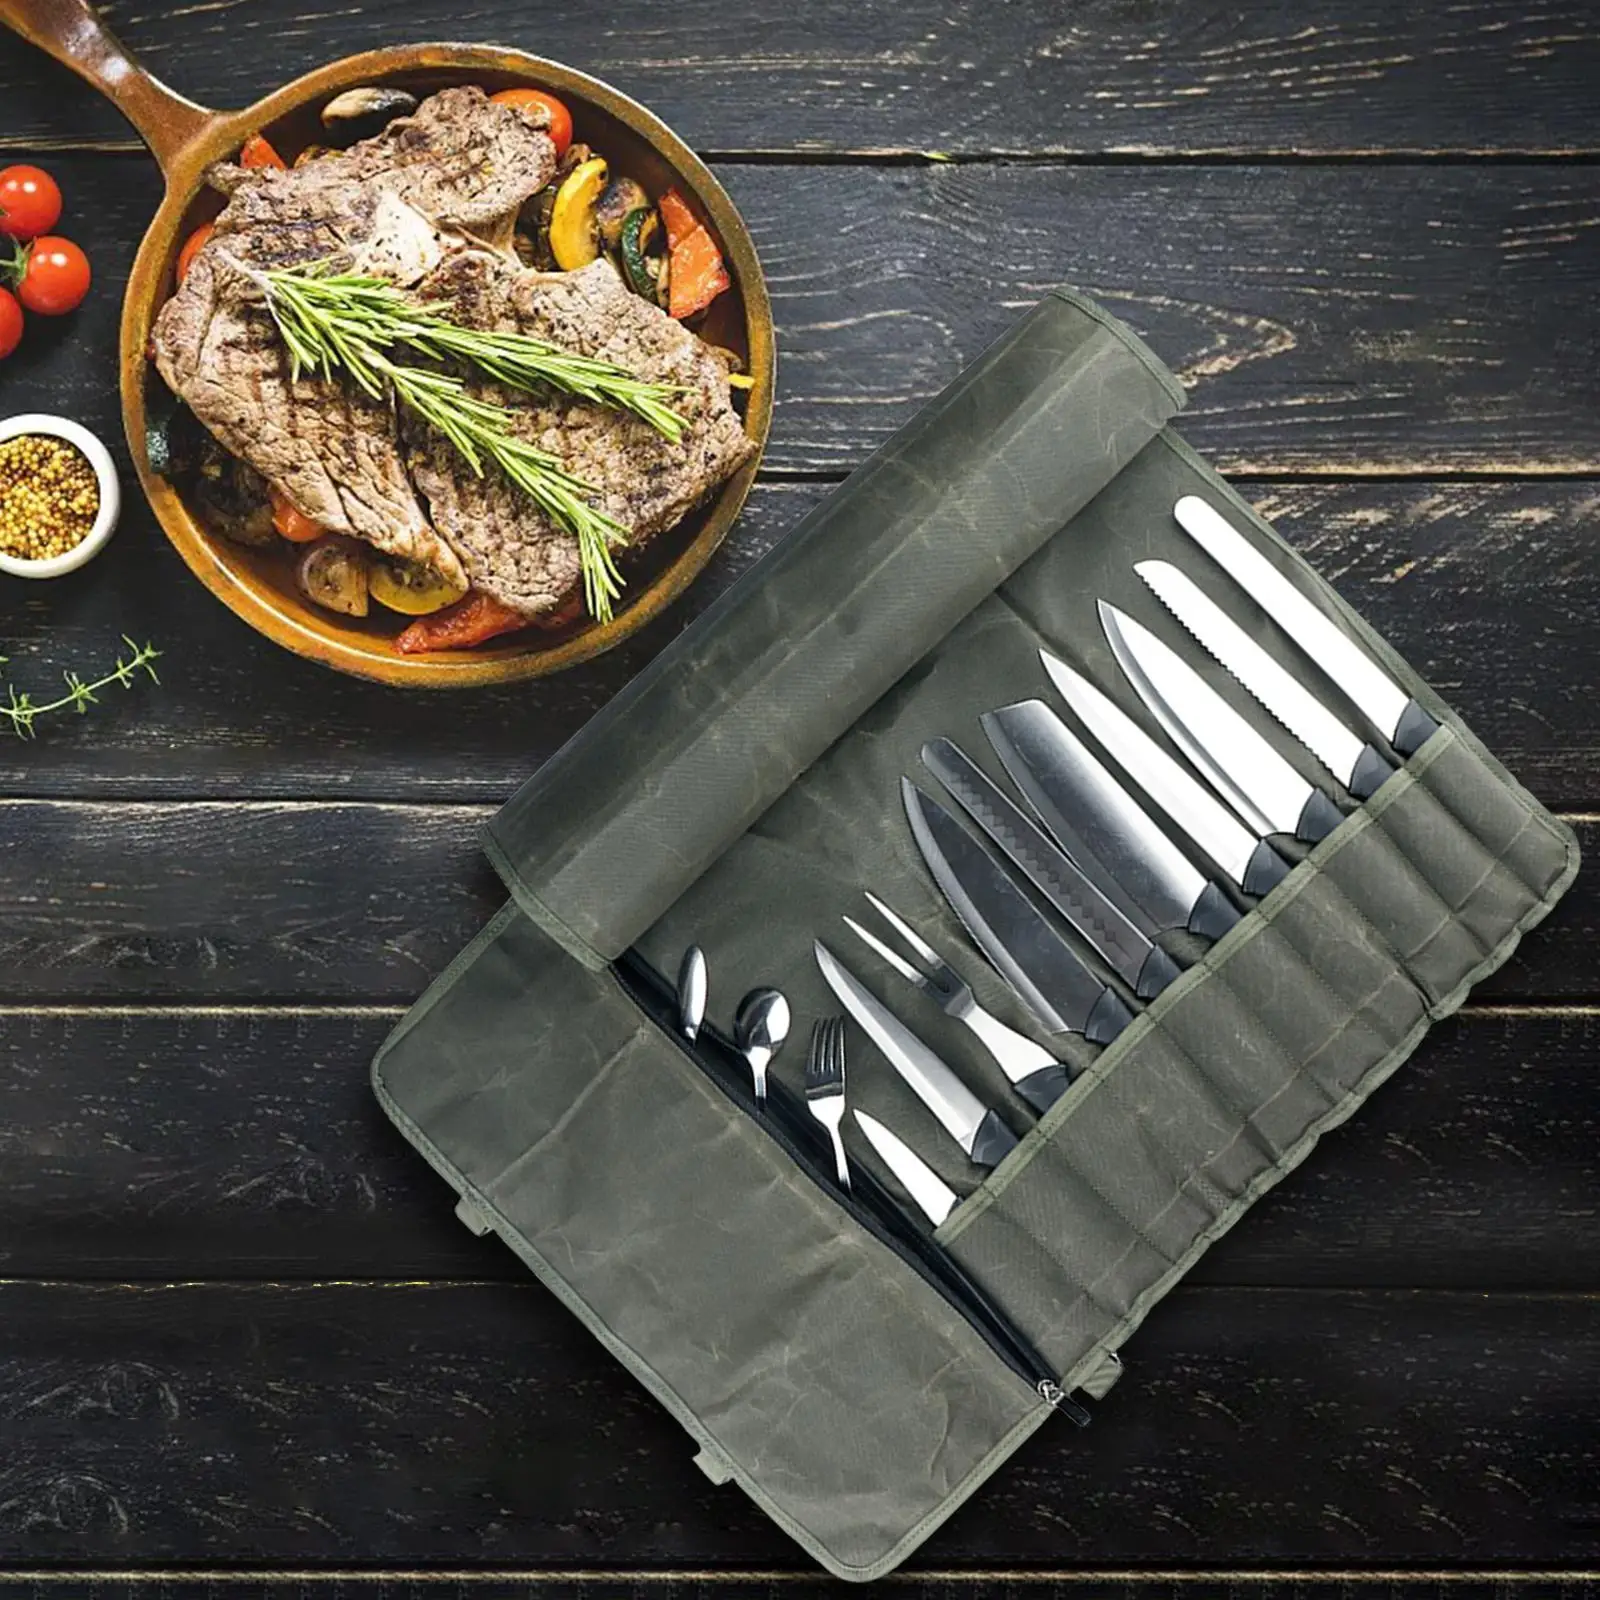 Chef Bag 10 Slots Chef Case Pouch Holders for Picnic BBQ